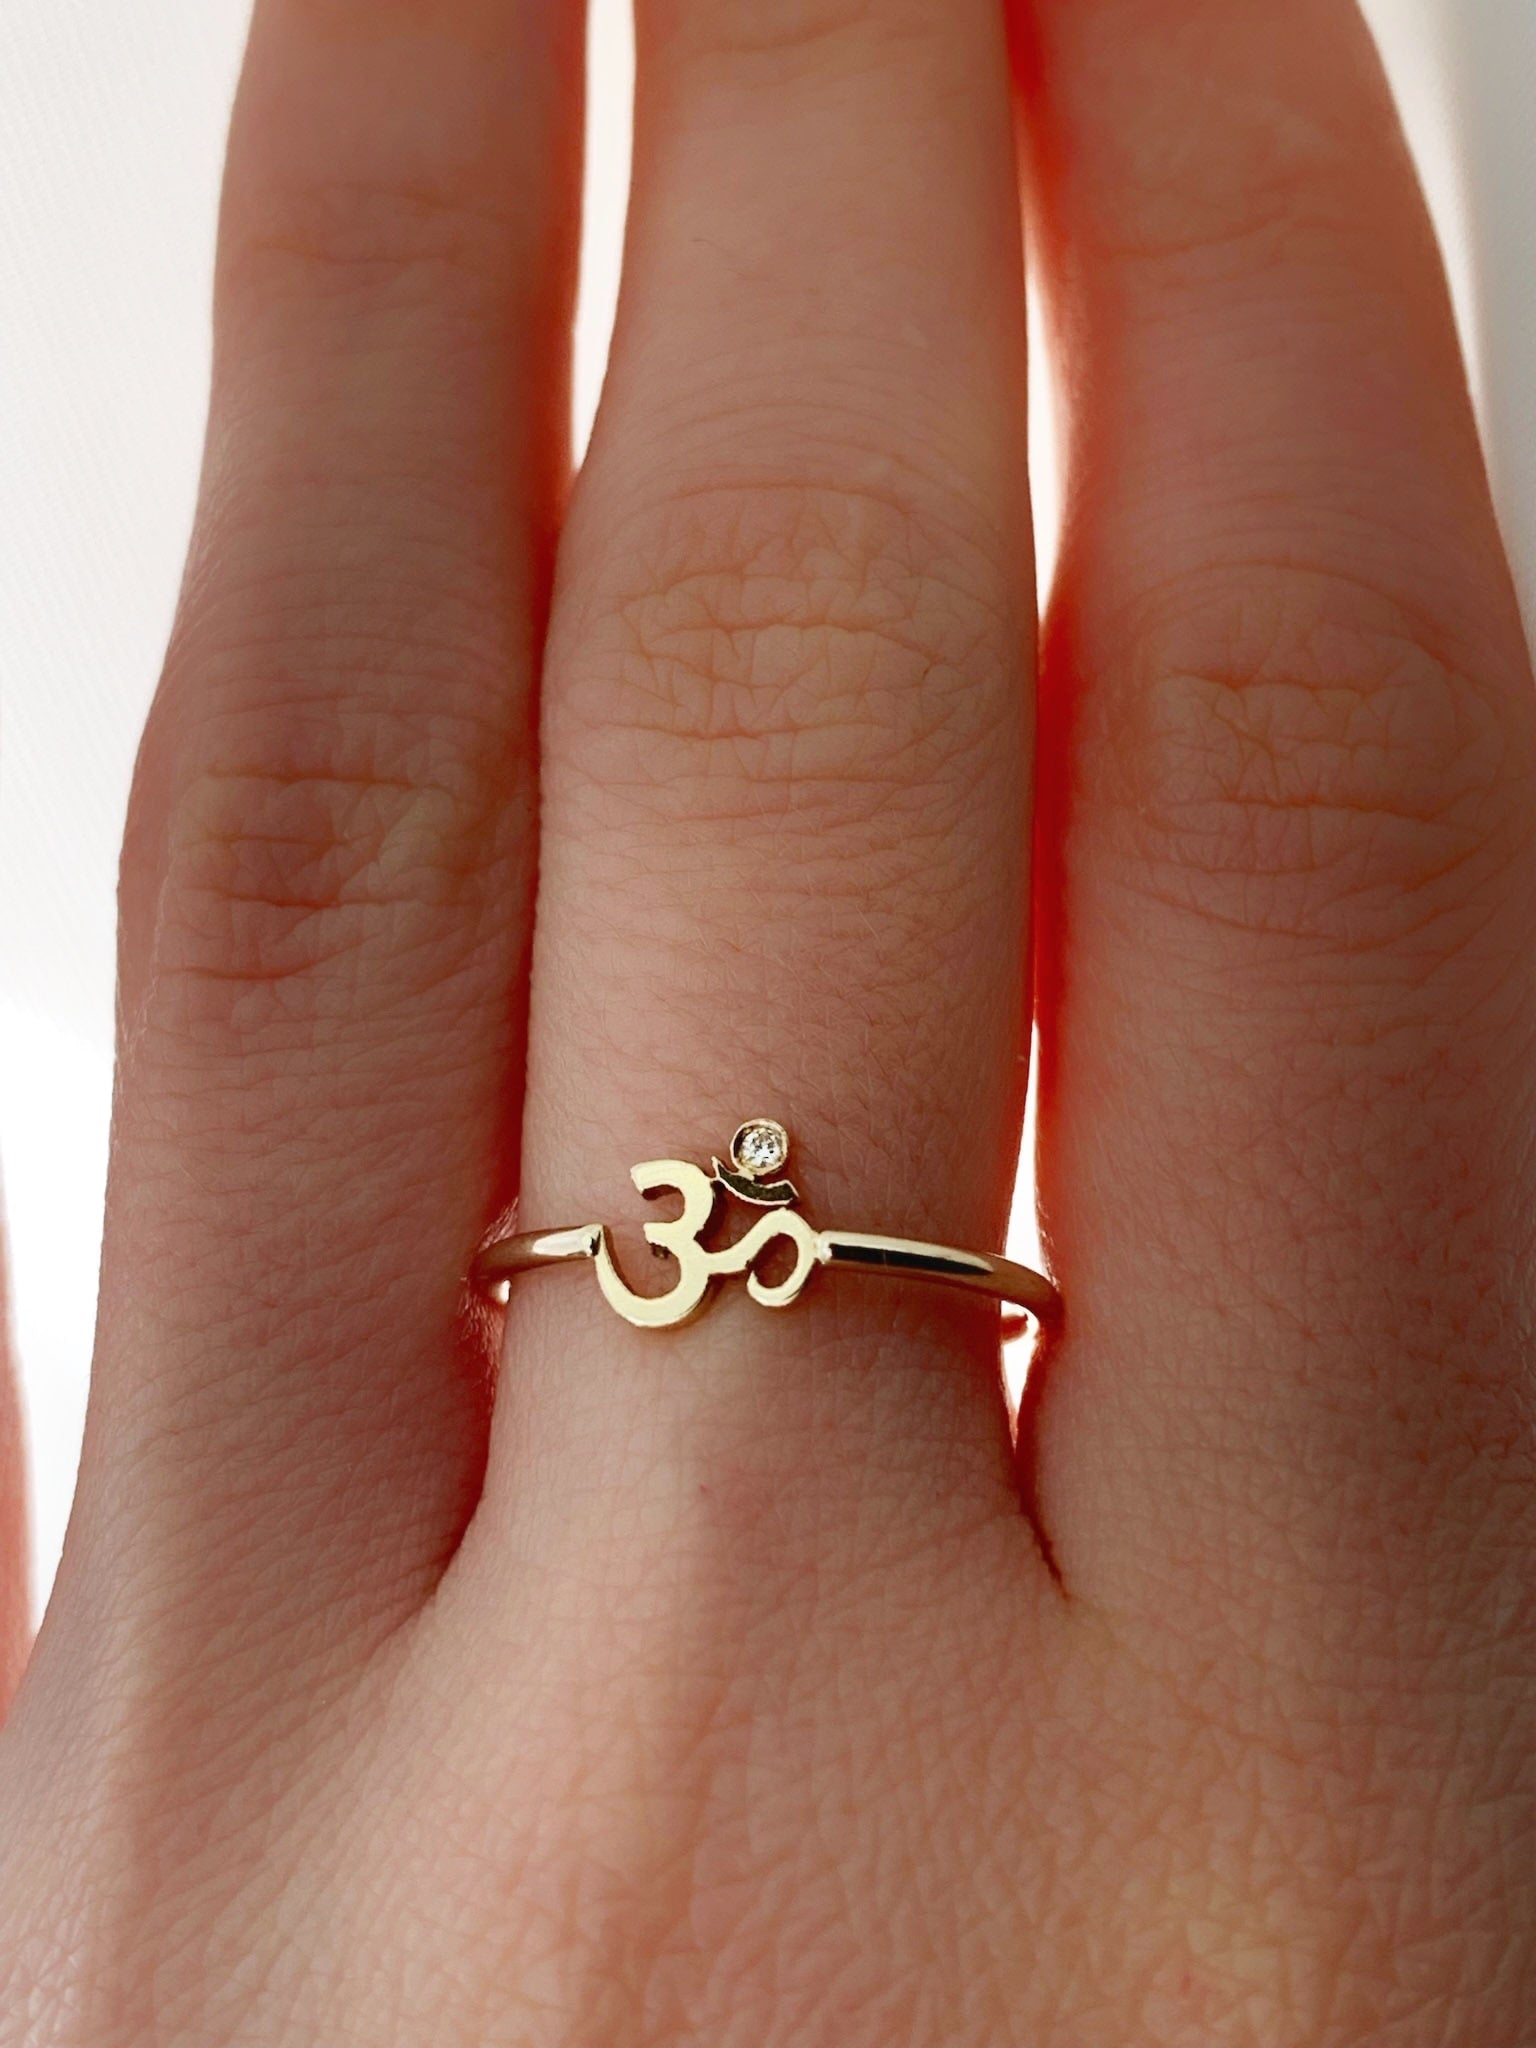 Om Ring in Sterling Silver | Silver, Sterling, Iphone wallpaper photography